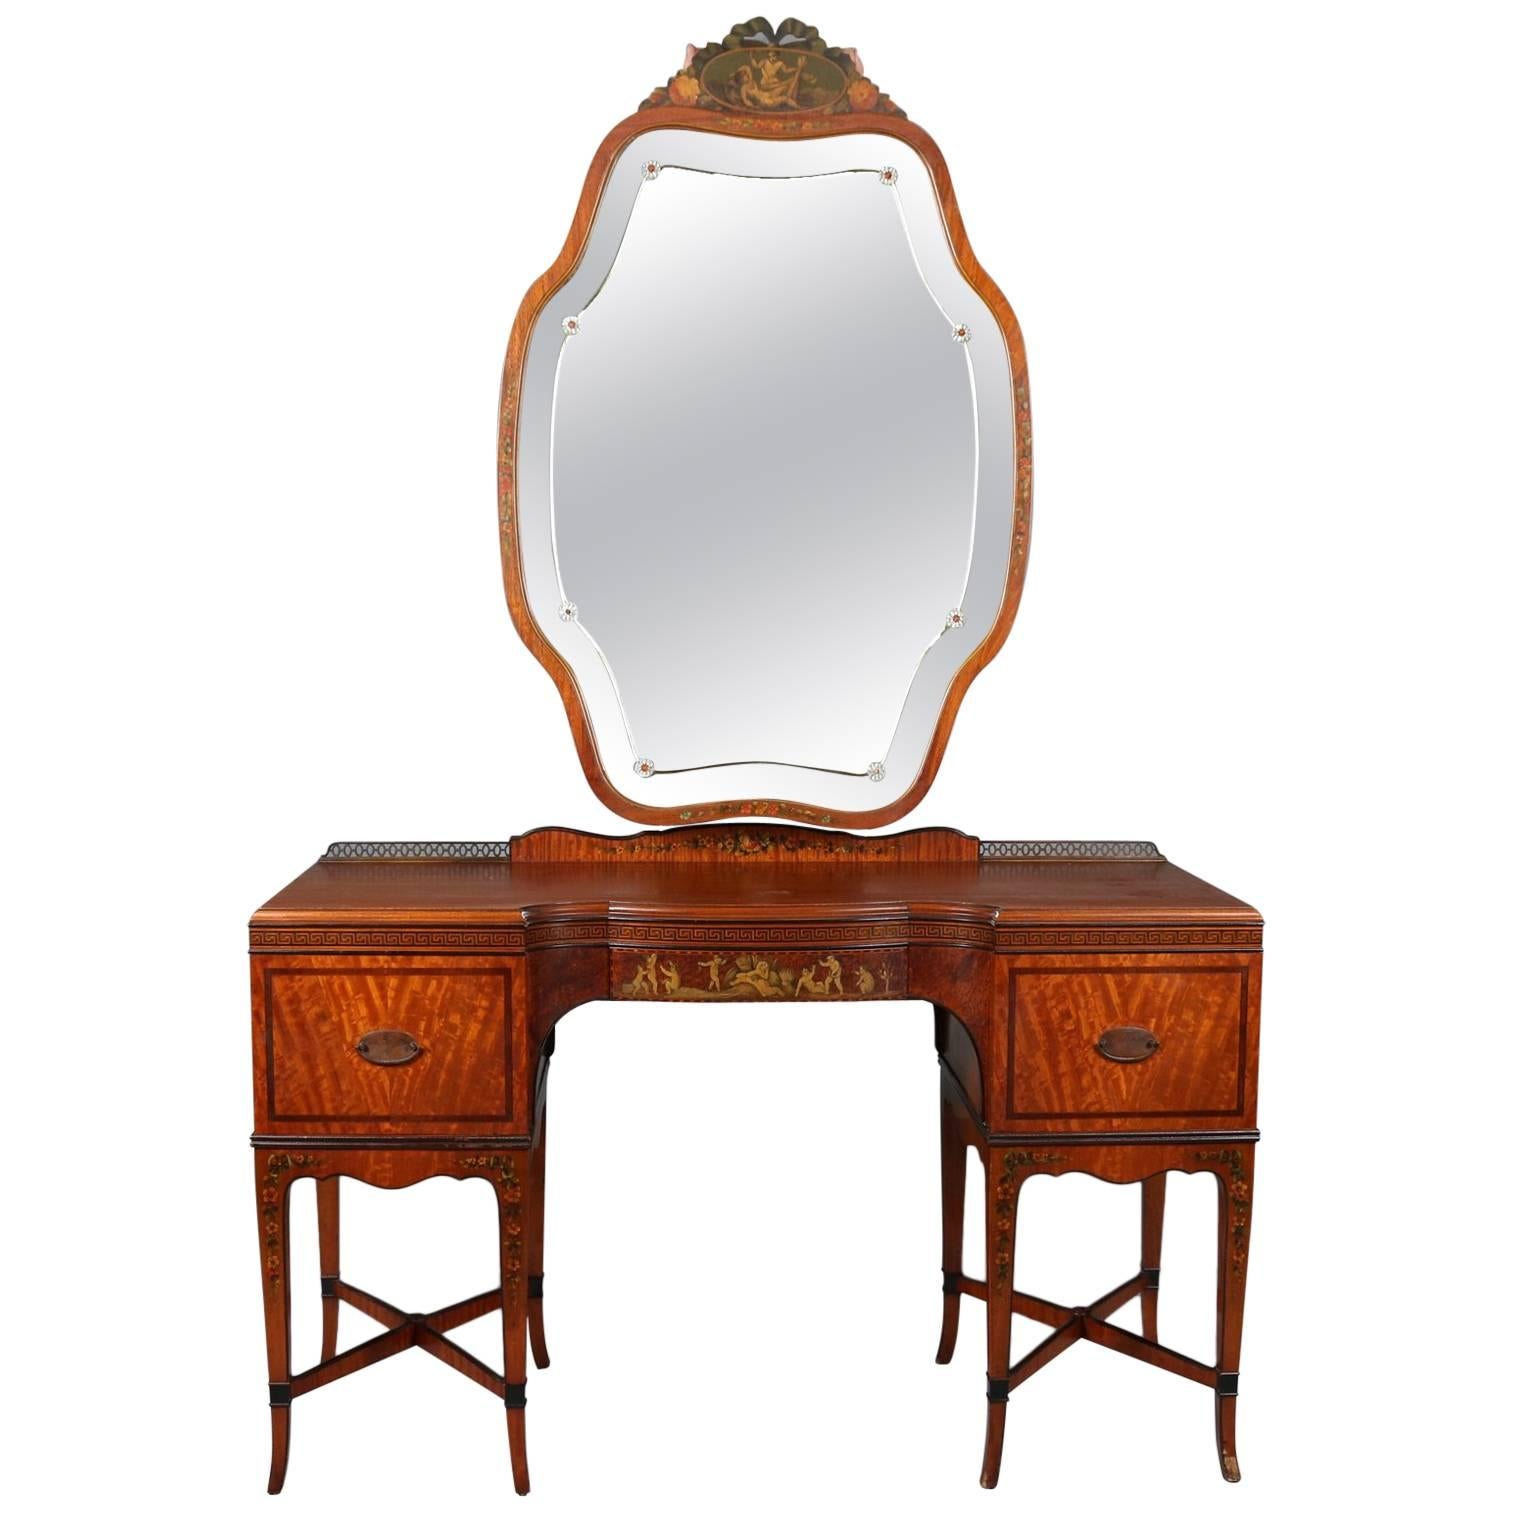 Antique Adam Style Painted and Ebonized Satinwood and Bronze Mirrored Vanity